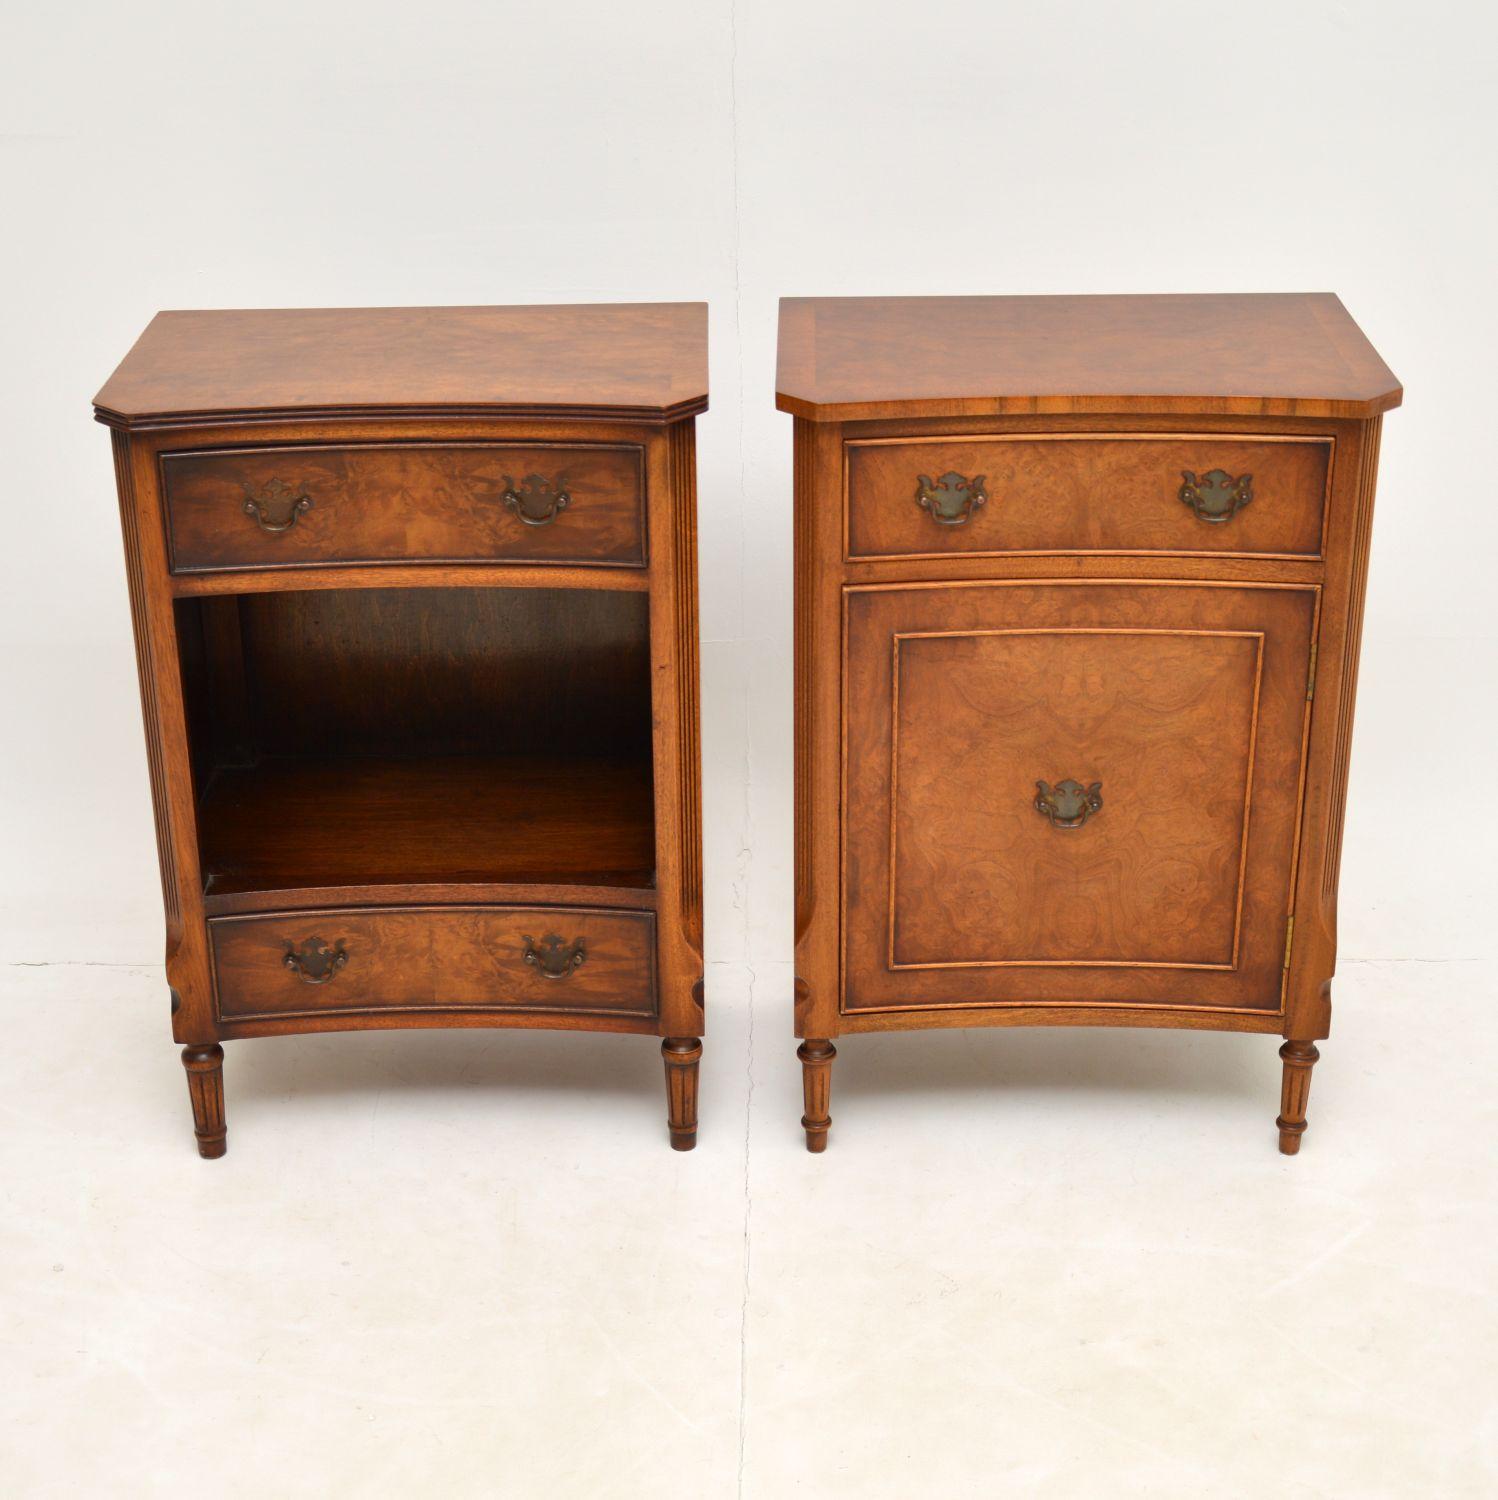 A smart and stylish matched pair of concave bedside cabinets in burr walnut. These are in the antique Georgian style, they date from around the 1930’s.

The quality is fantastic, they have gorgeous burr walnut veneers and a beautiful warm colour